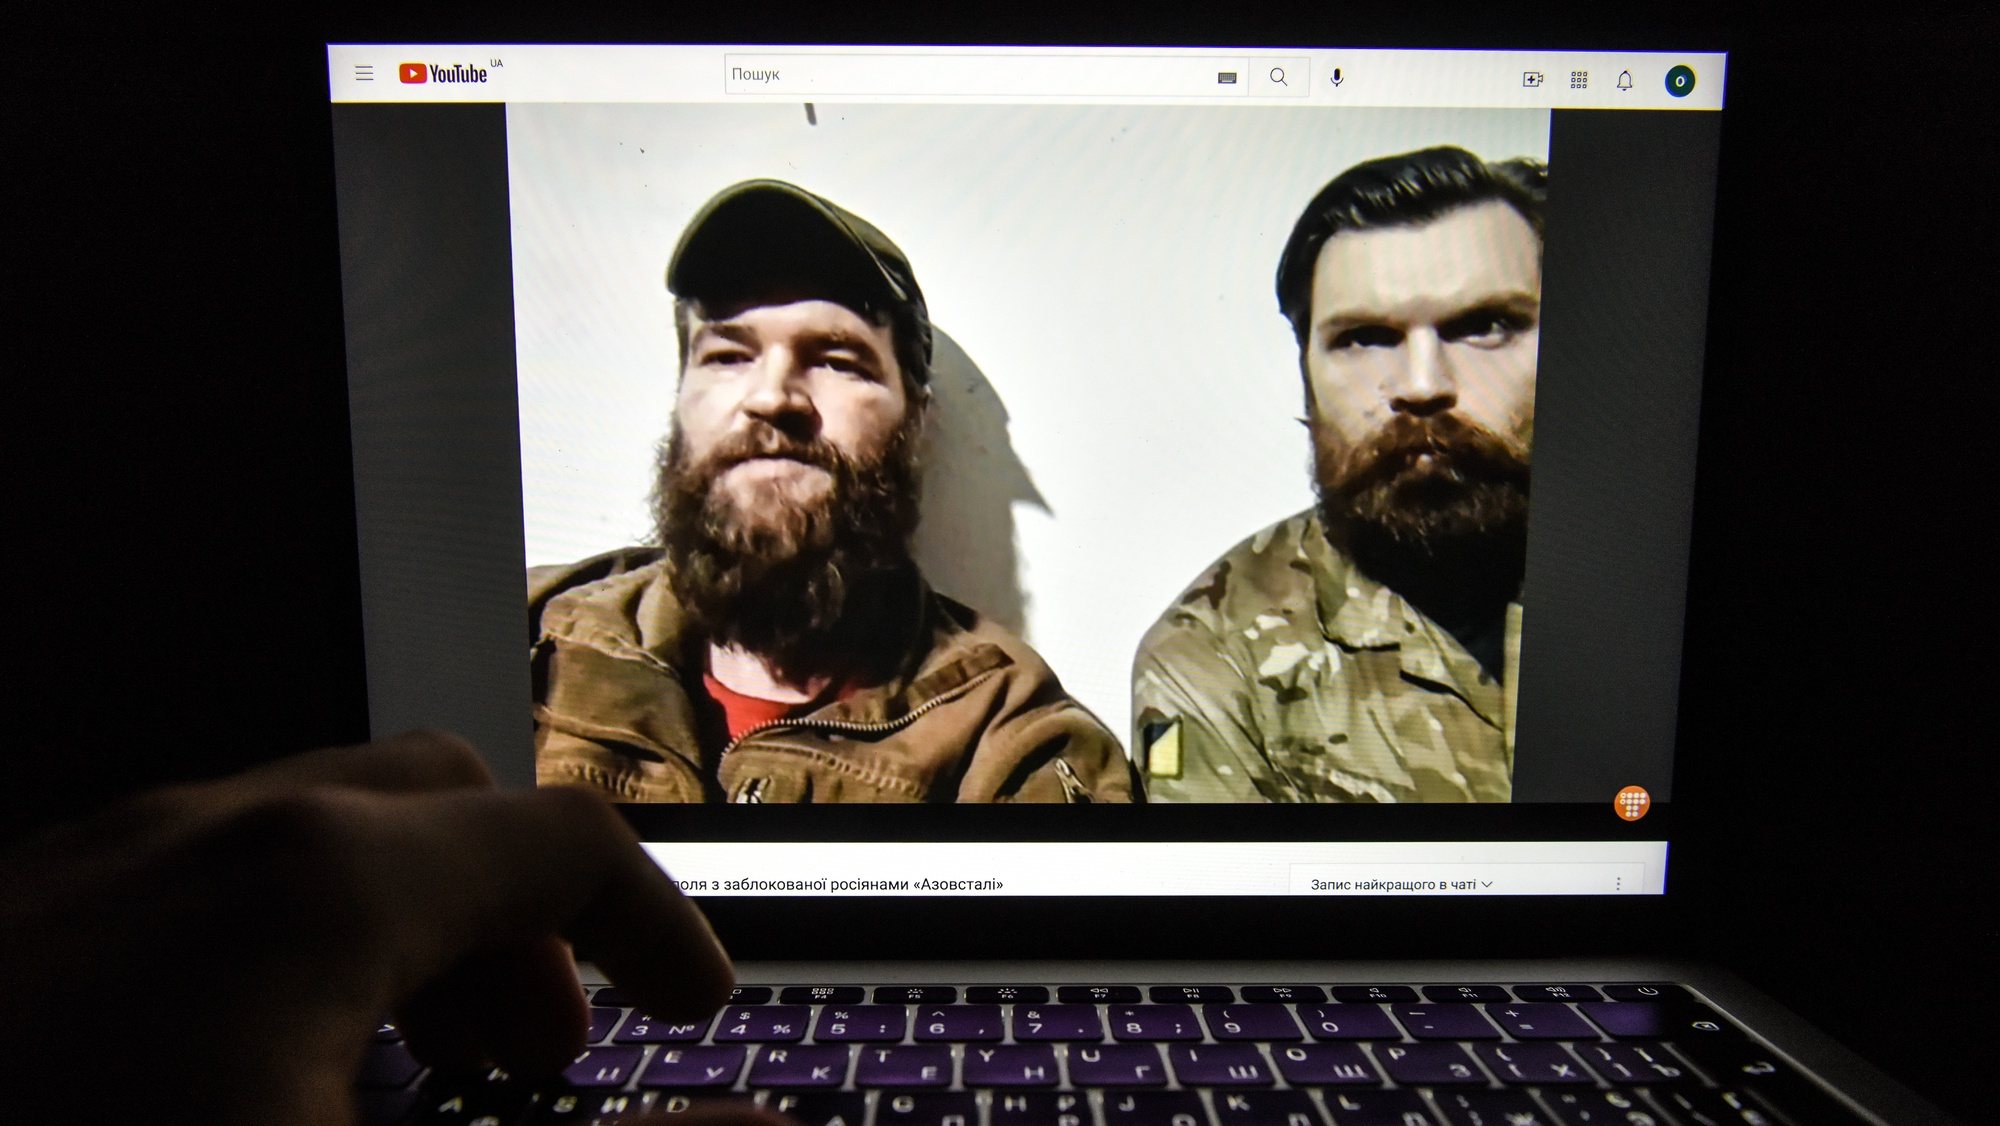 epa09934781 A video of a press conference from the Azovstal steel plant in Mariupol by Azov regiment servicemen Illia Samoilenko (R) and Sviatoslav Palamar (L) is seen on a computer screen in Kyiv, Ukraine, 08 May 2022. On 24 February, Russian troops had entered Ukrainian territory in what the Russian president declared a &#039;special military operation&#039;, resulting in fighting and destruction in the country, a huge flow of refugees, and multiple sanctions against Russia.  EPA/OLEG PETRASYUK